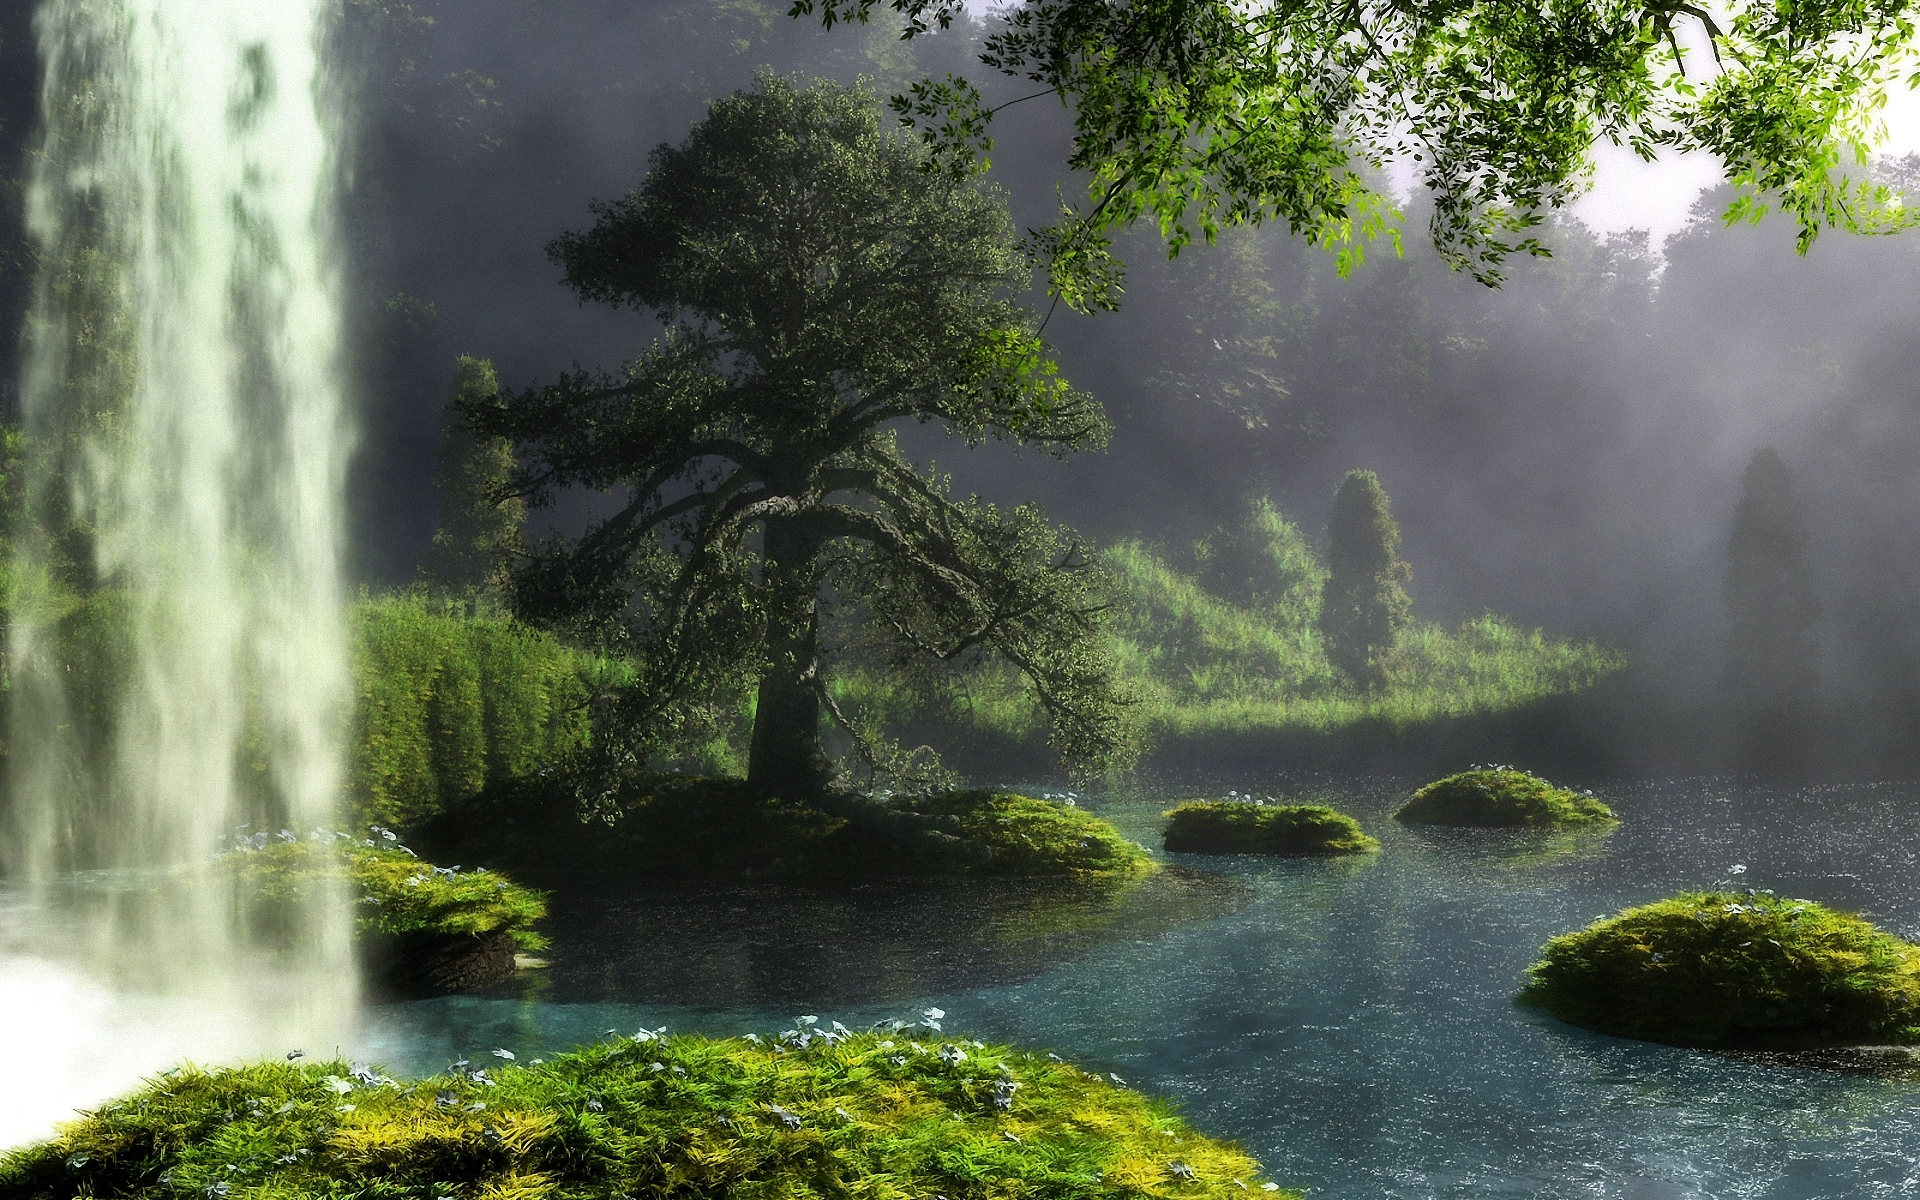 Wallpaper trees, lake, waterfall, nature, forest desktop wallpaper, hd  image, picture, background, a7beb1 | wallpapersmug